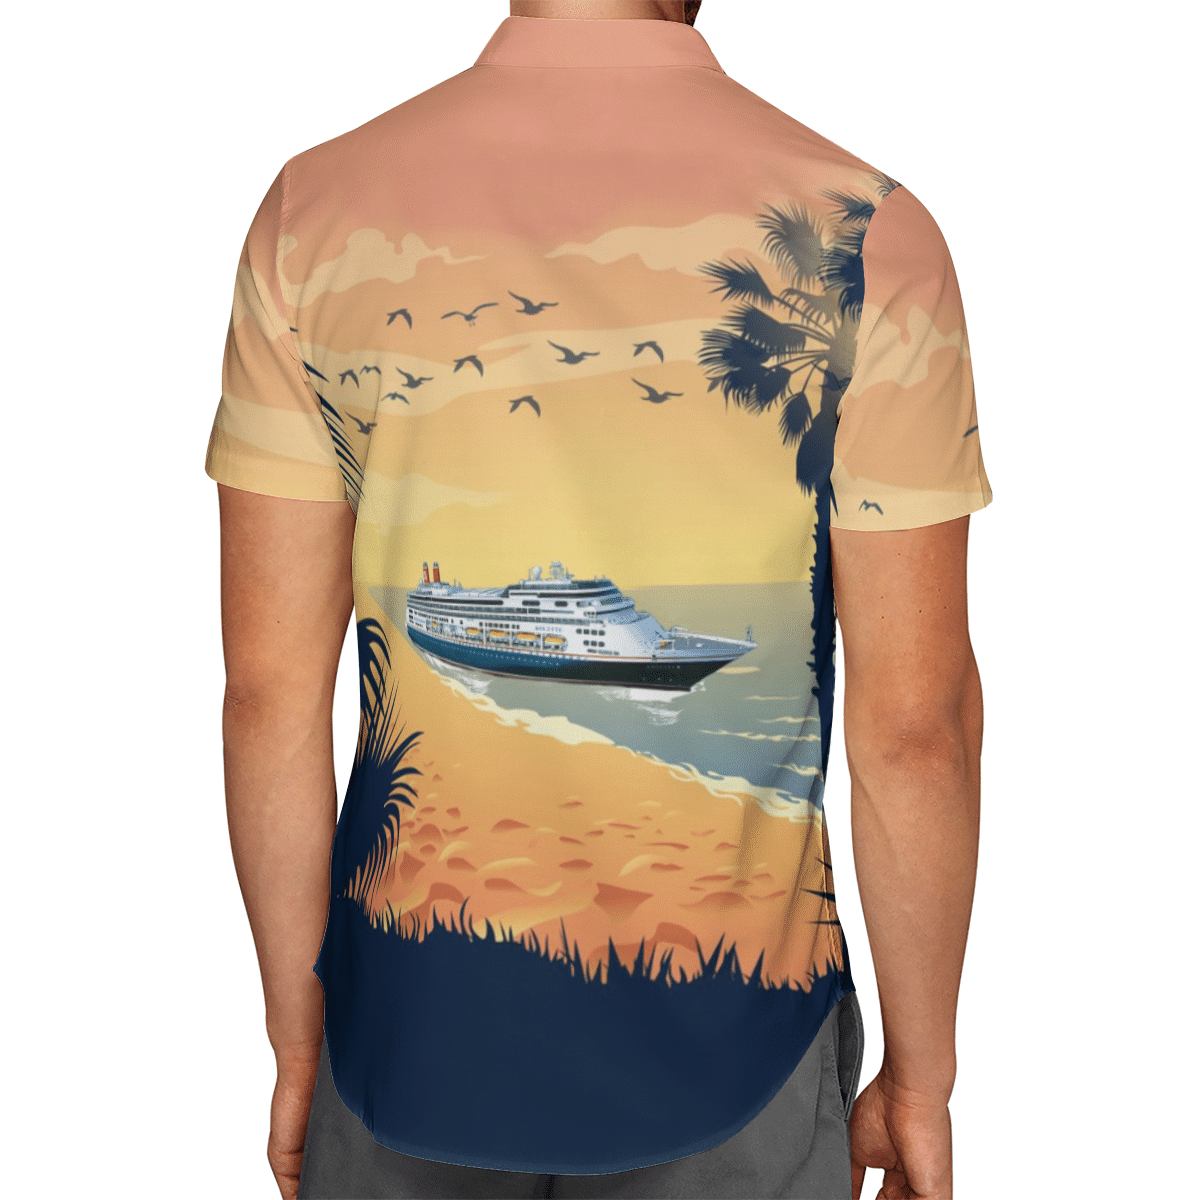 Going to the beach with a quality shirt 164